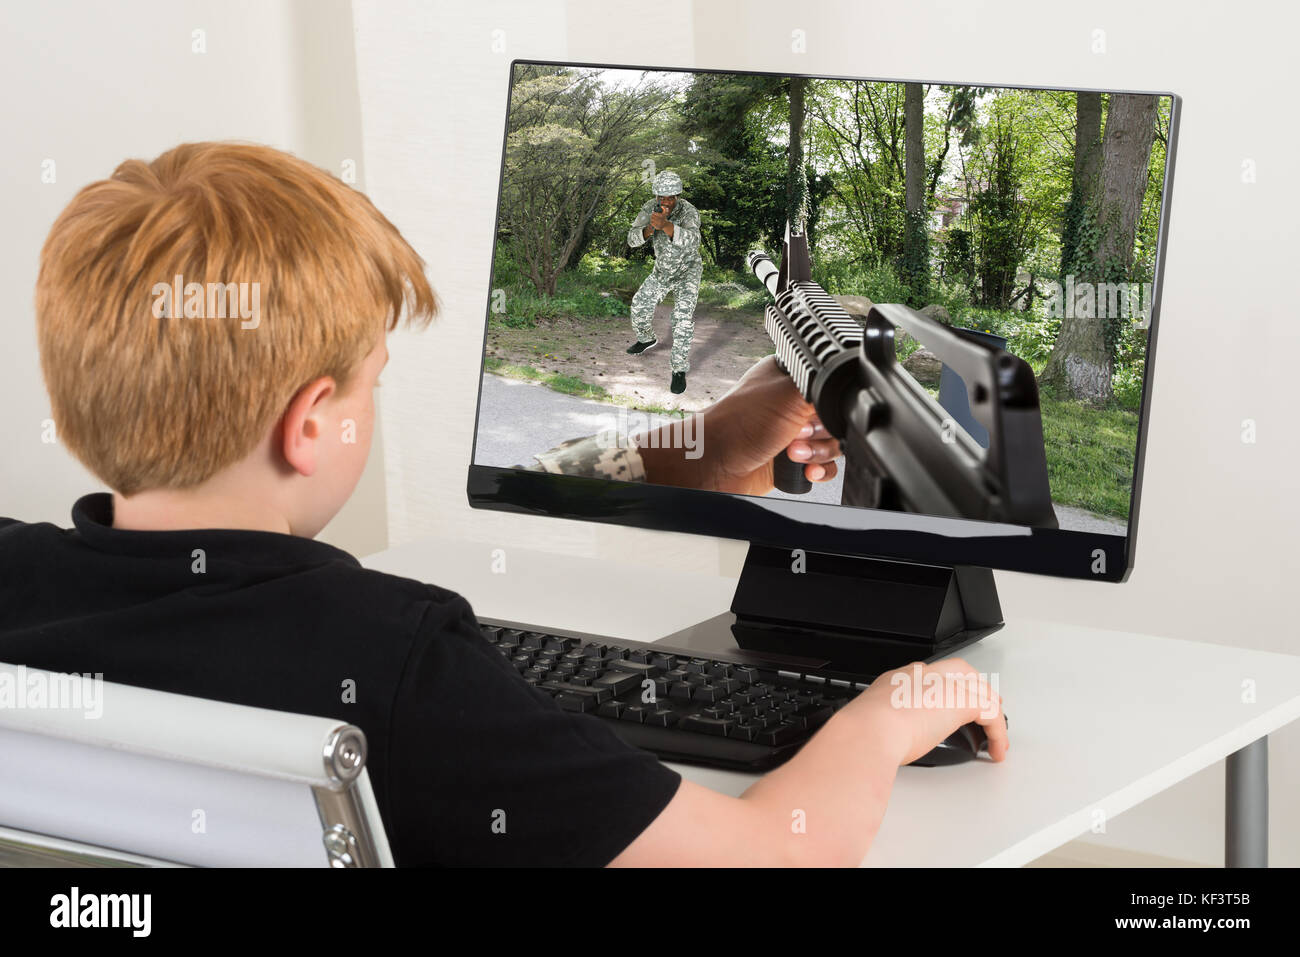 Boy Sitting On Chair Playing Action Game On Computer Stock Photo